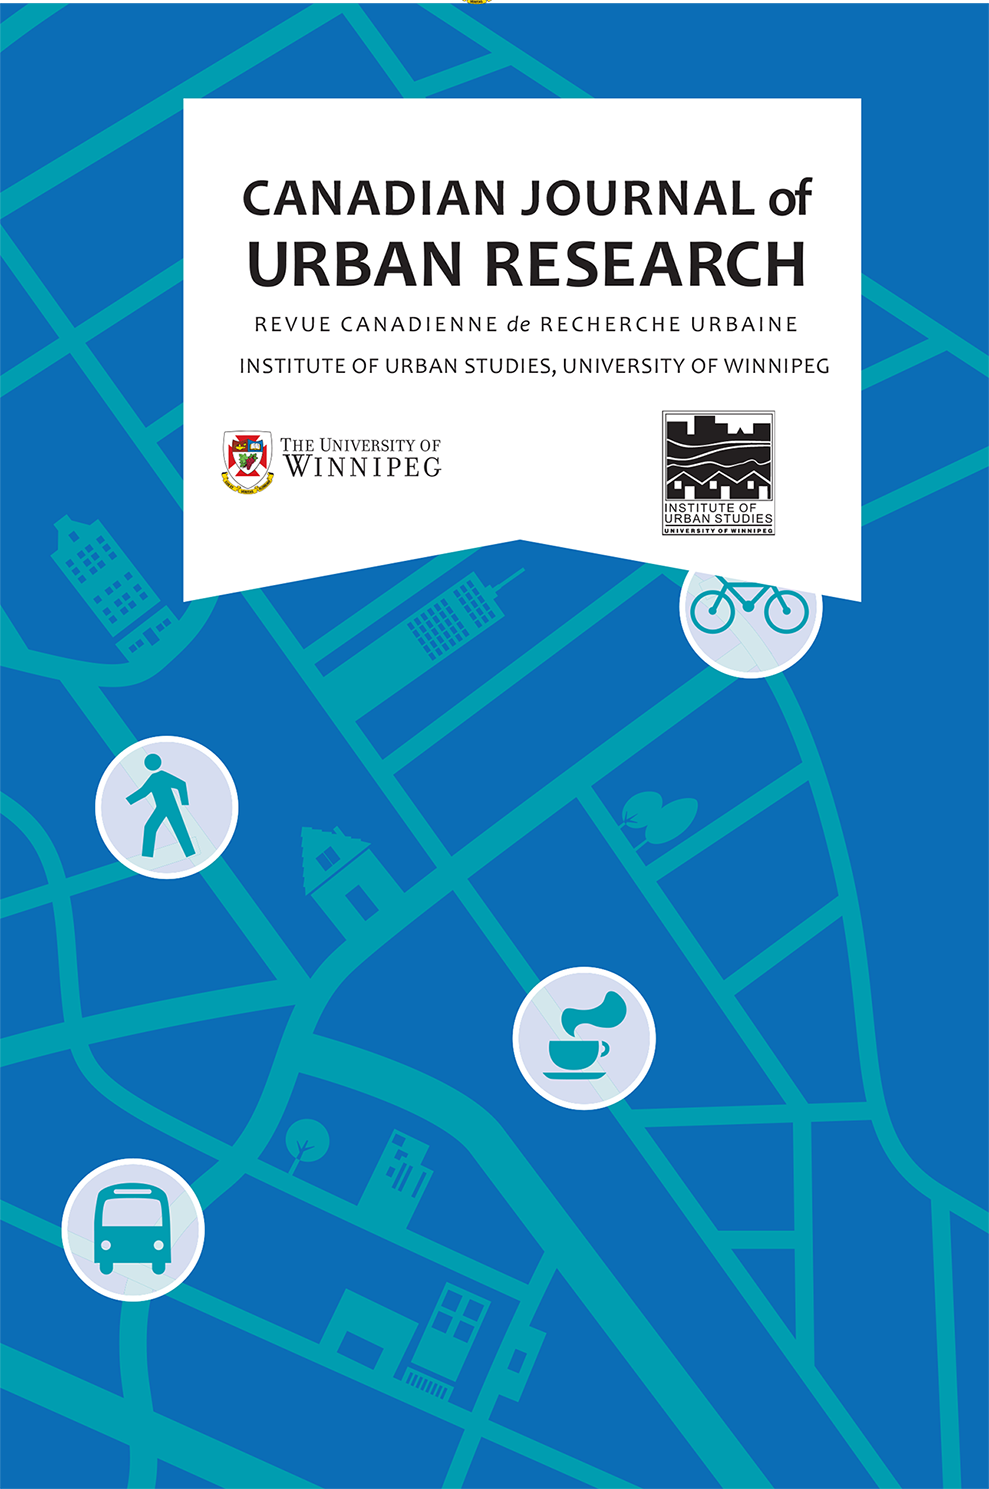 					View Vol. 29 No. 2 (2020): Canadian Journal of Urban Research - Winter 2020 Issue
				